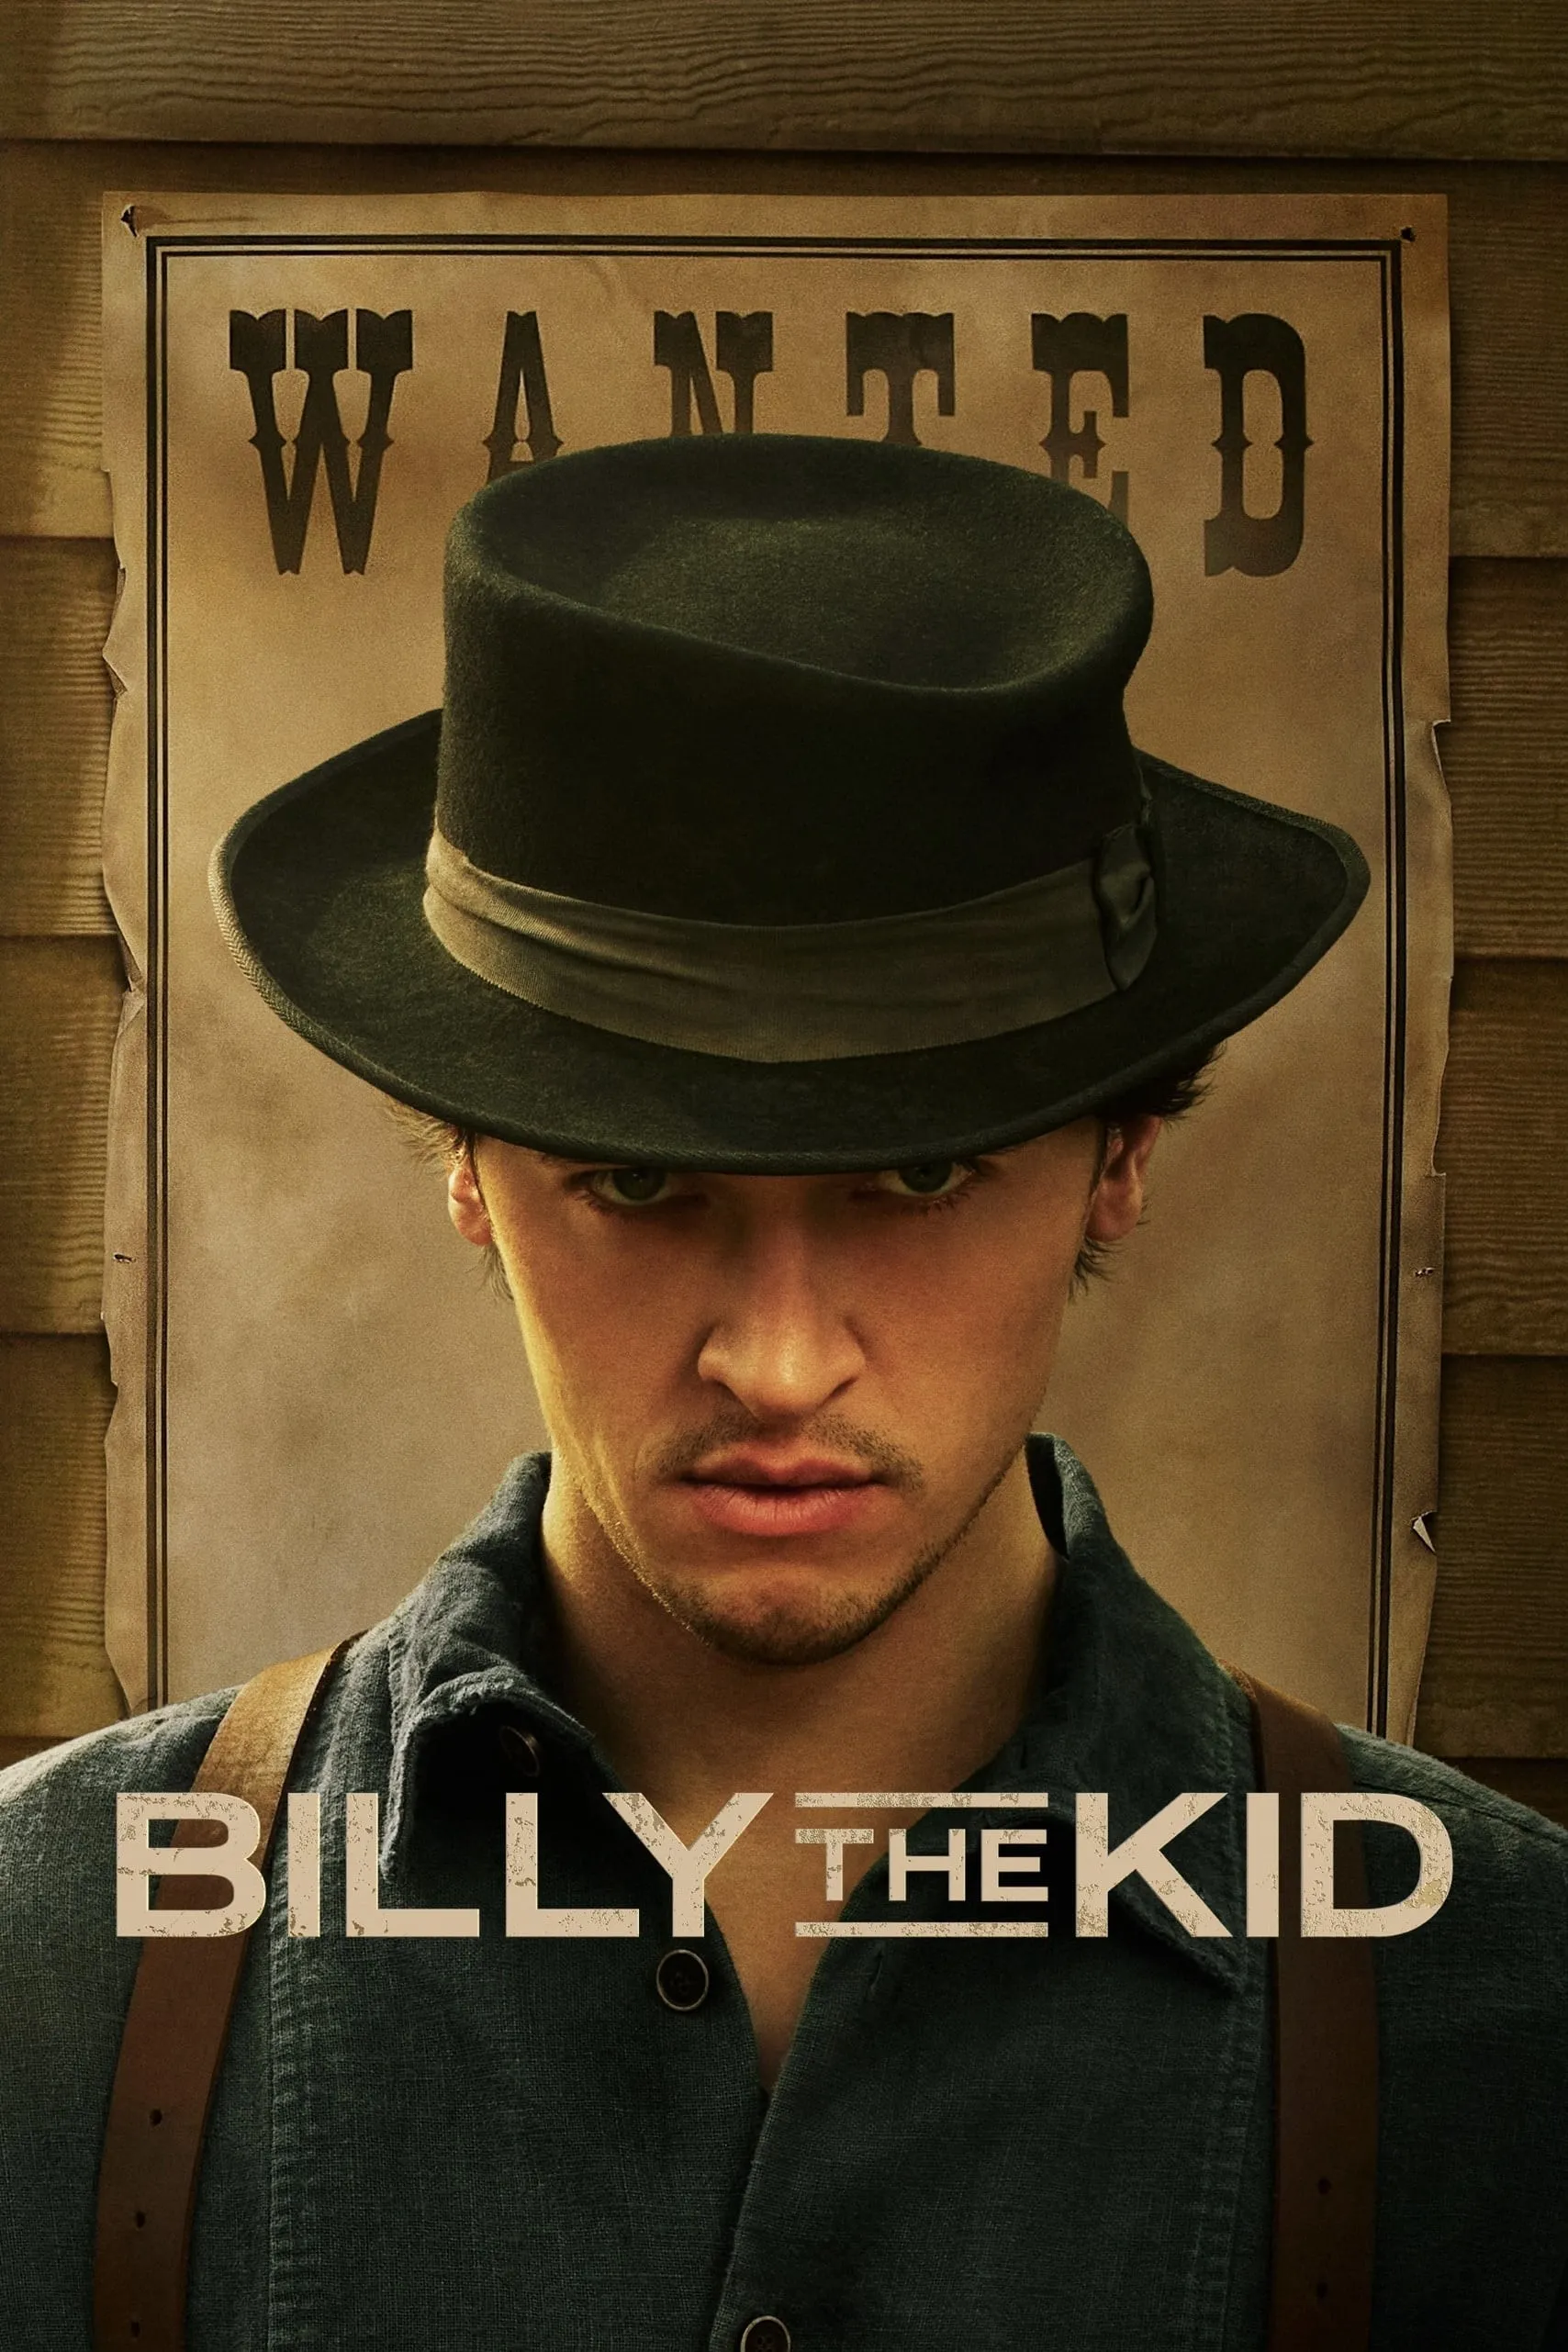 Billy the Kid TV Show Information & Trailers